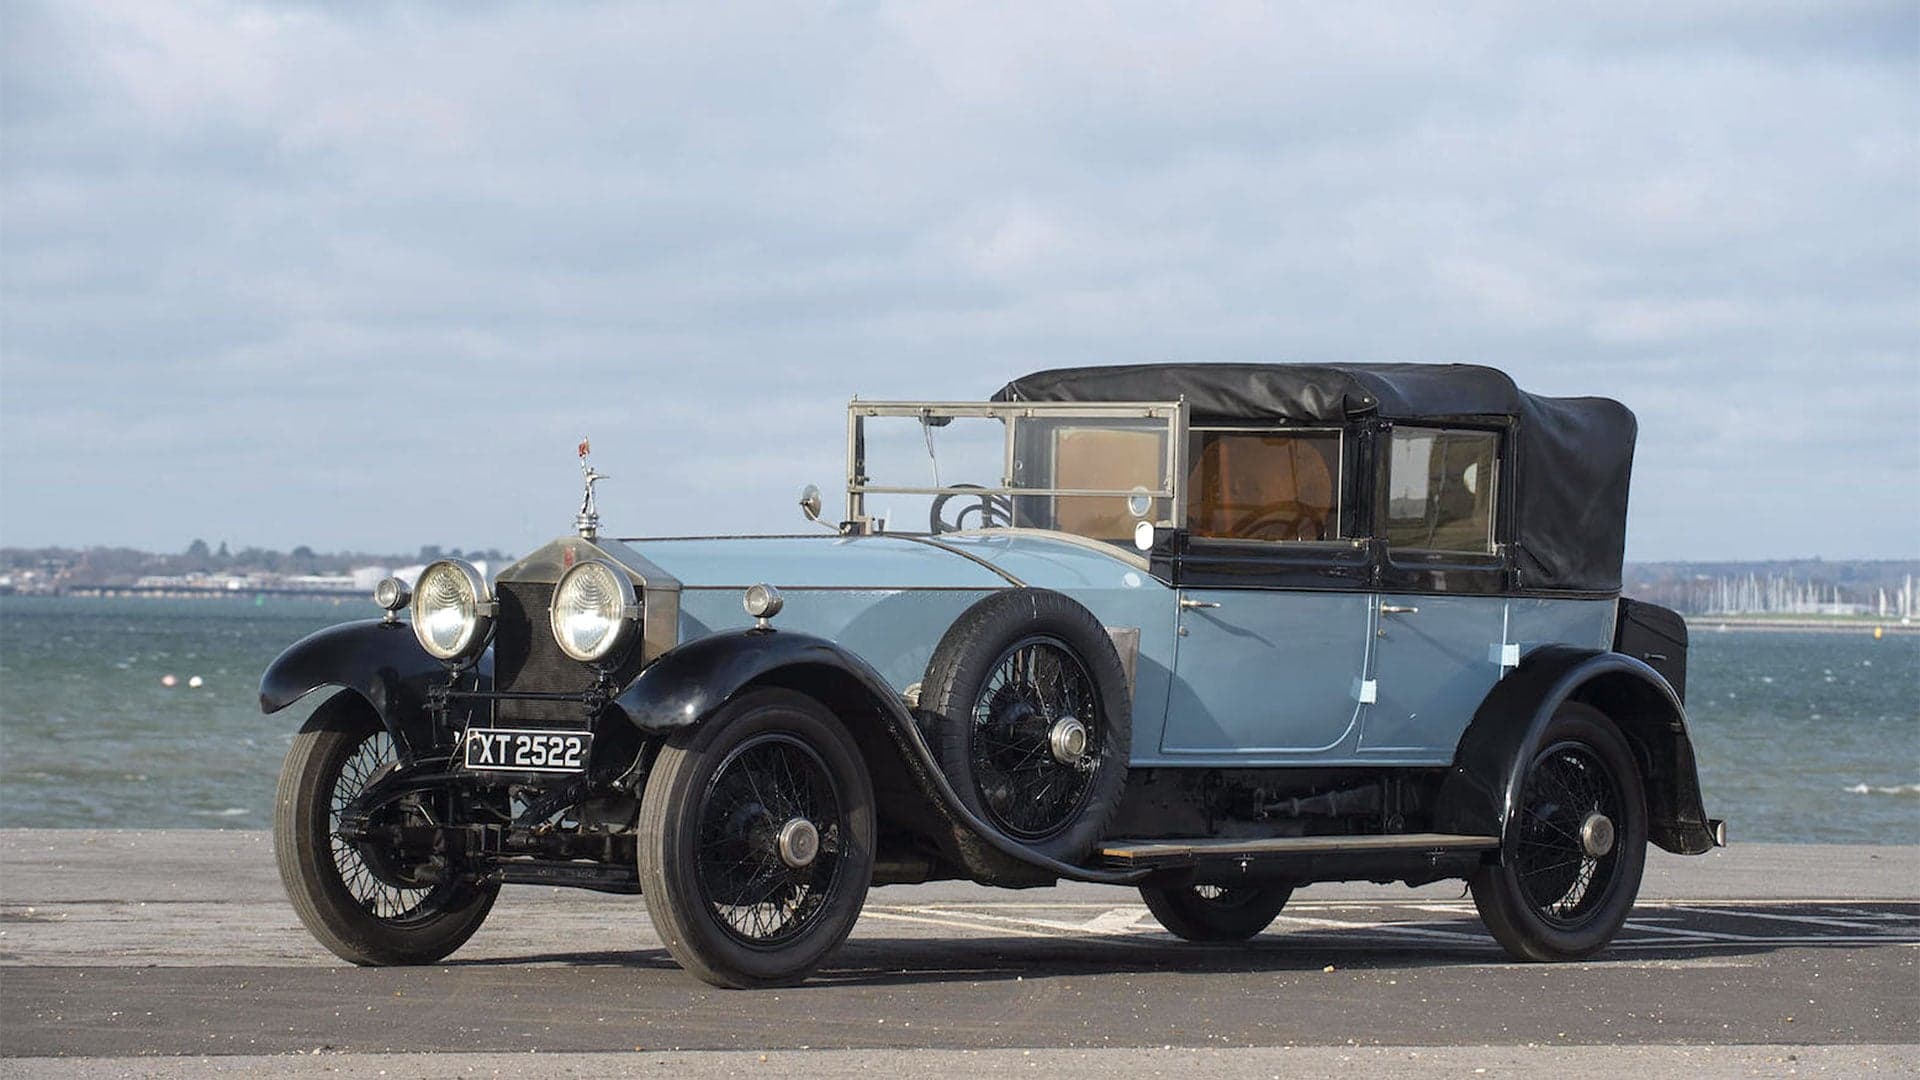 A Mariner’s Ultimate Rolls-Royce Goes Up for Auction